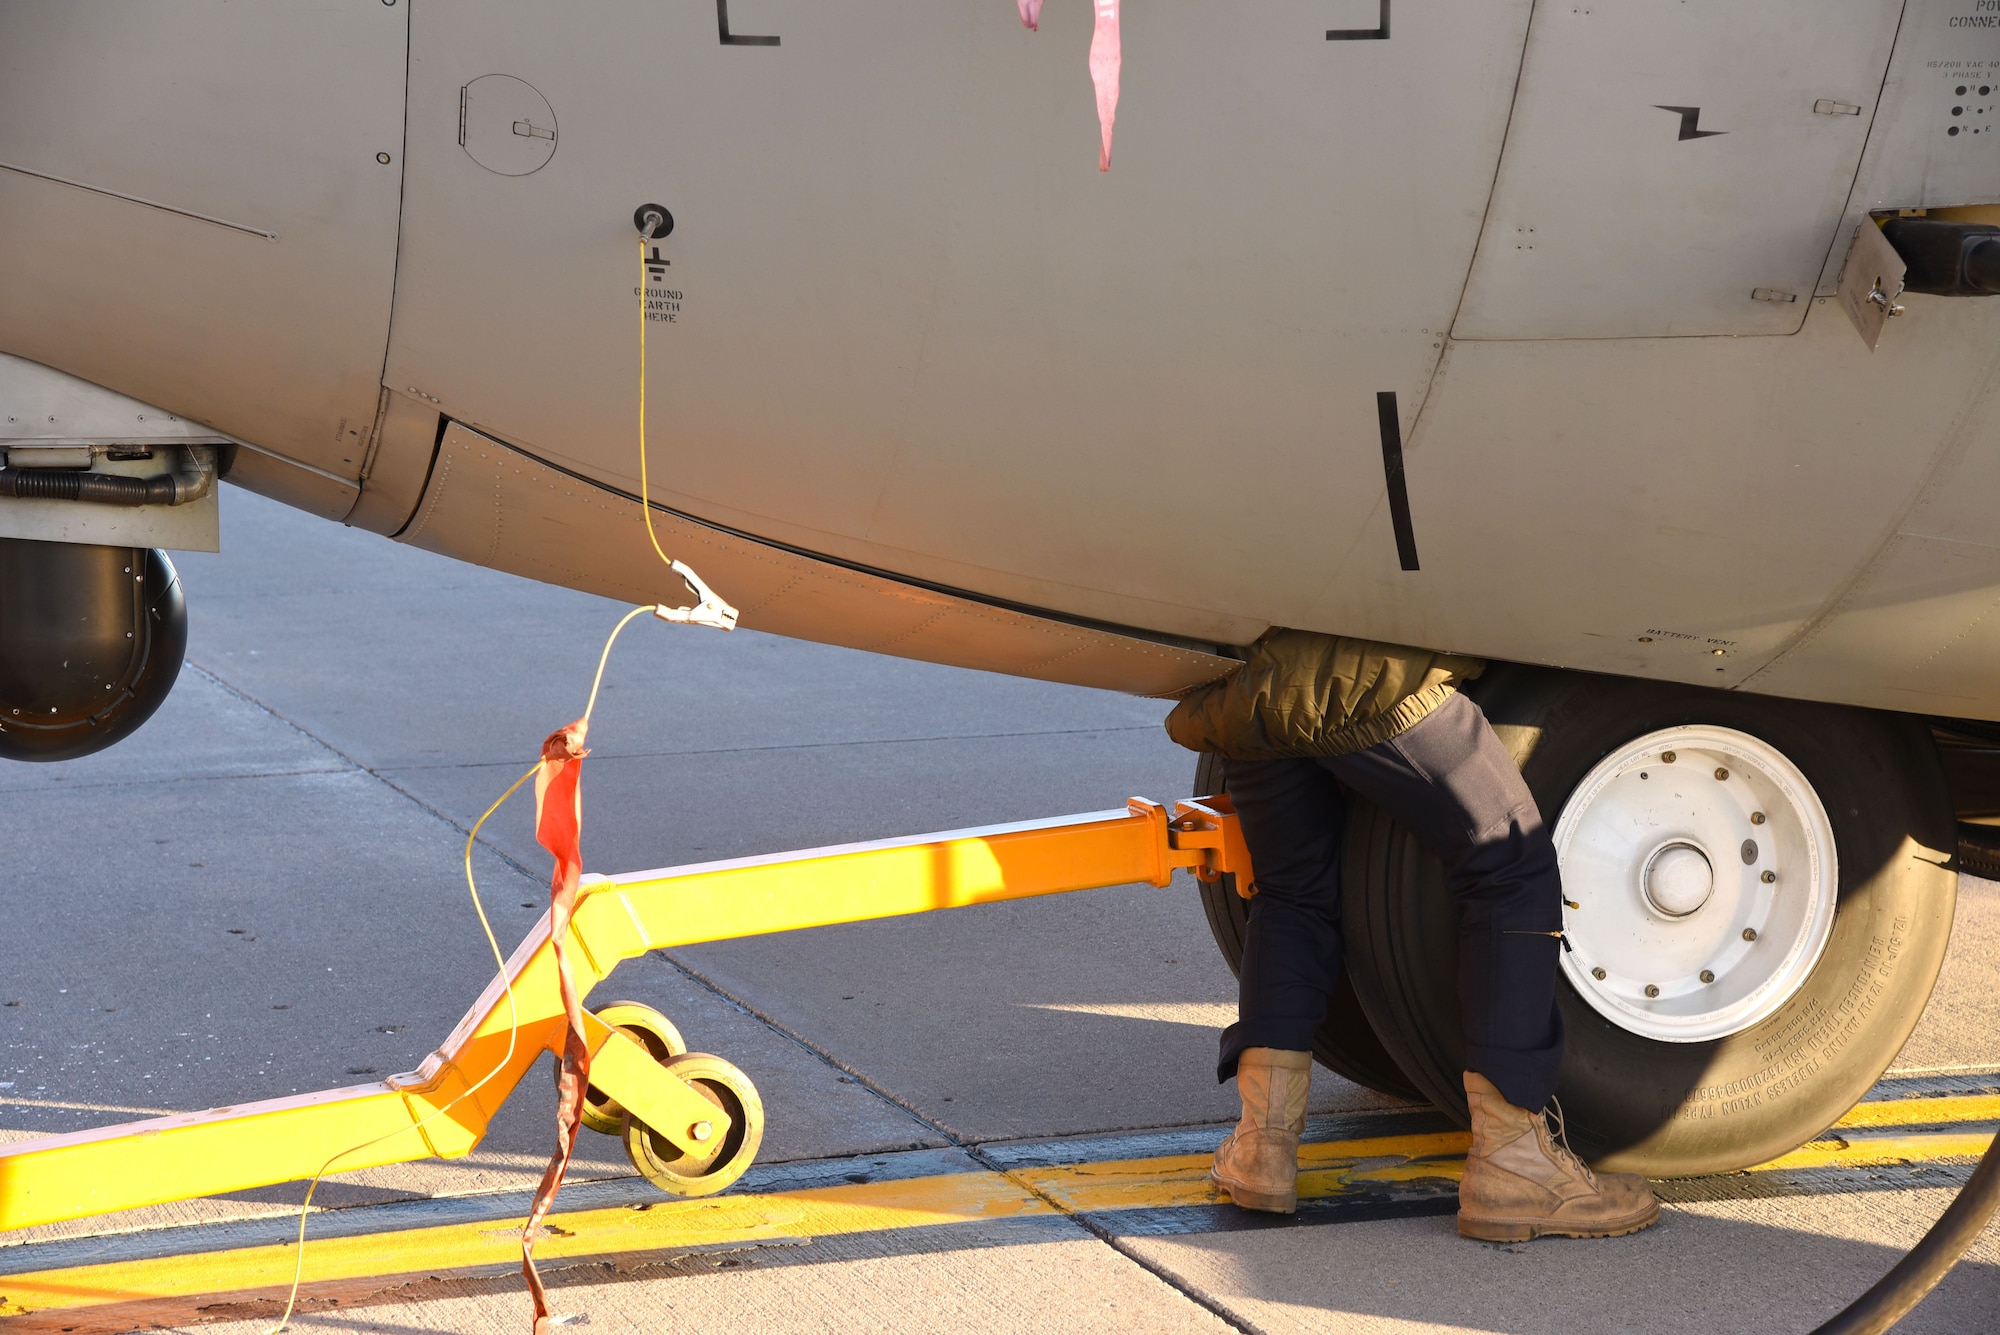 A service member with the Indian Air Force performs routine maintenance on a C-130 Hercules during a pit-stop at Grand Forks Air Force Base, N.D. Jan. 13, 2018, before heading to McChord AFB, Wash. for exercise Vajra Prahar. (U.S. Air Force photo by Airman 1st Class Elora J. Martinez)